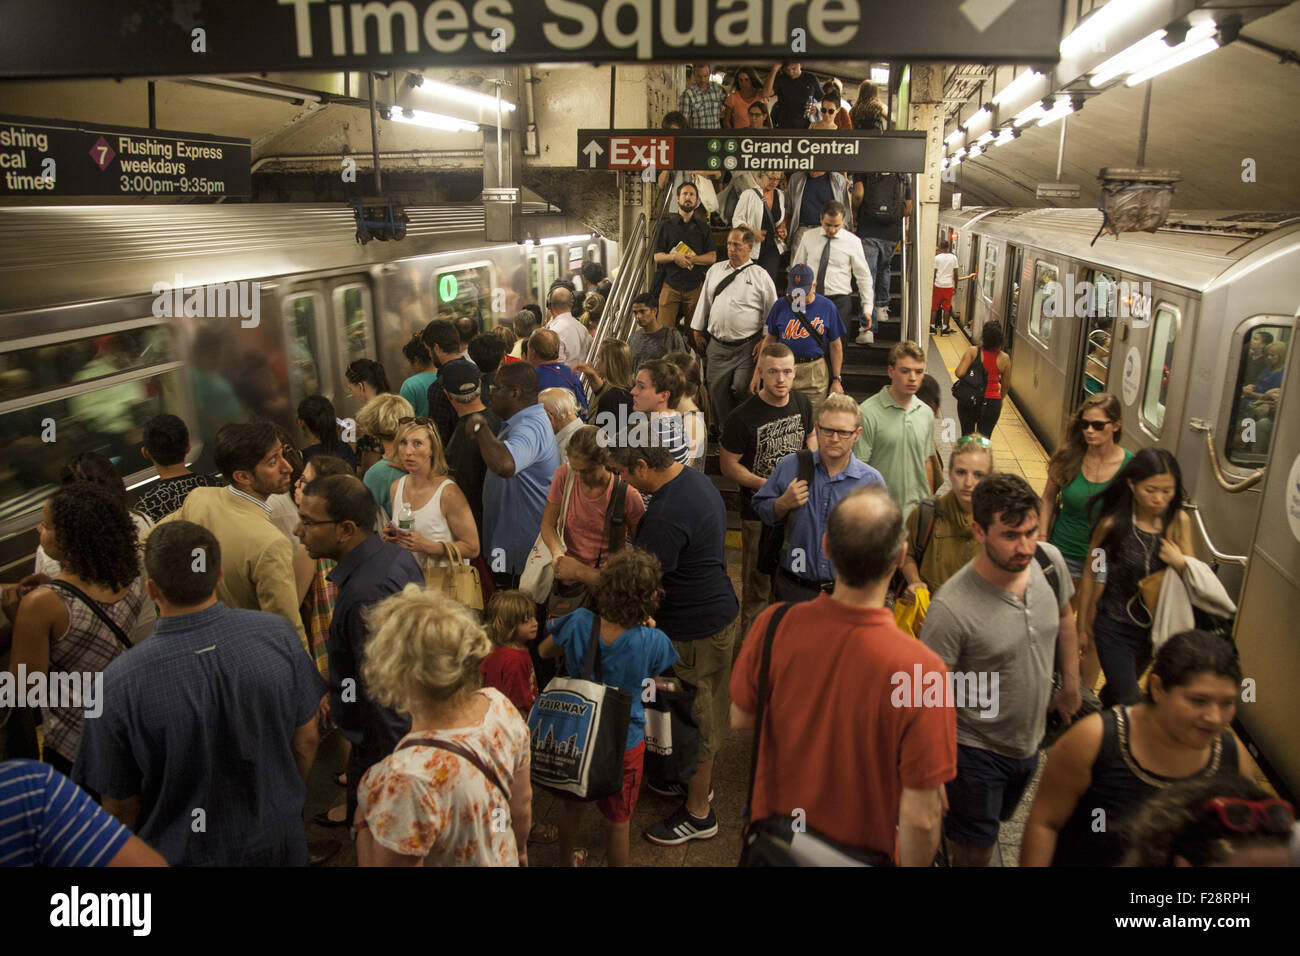 Evening rush hour at Grand Central Station on the platform of the #7 subway train line. NYC Stock Photo